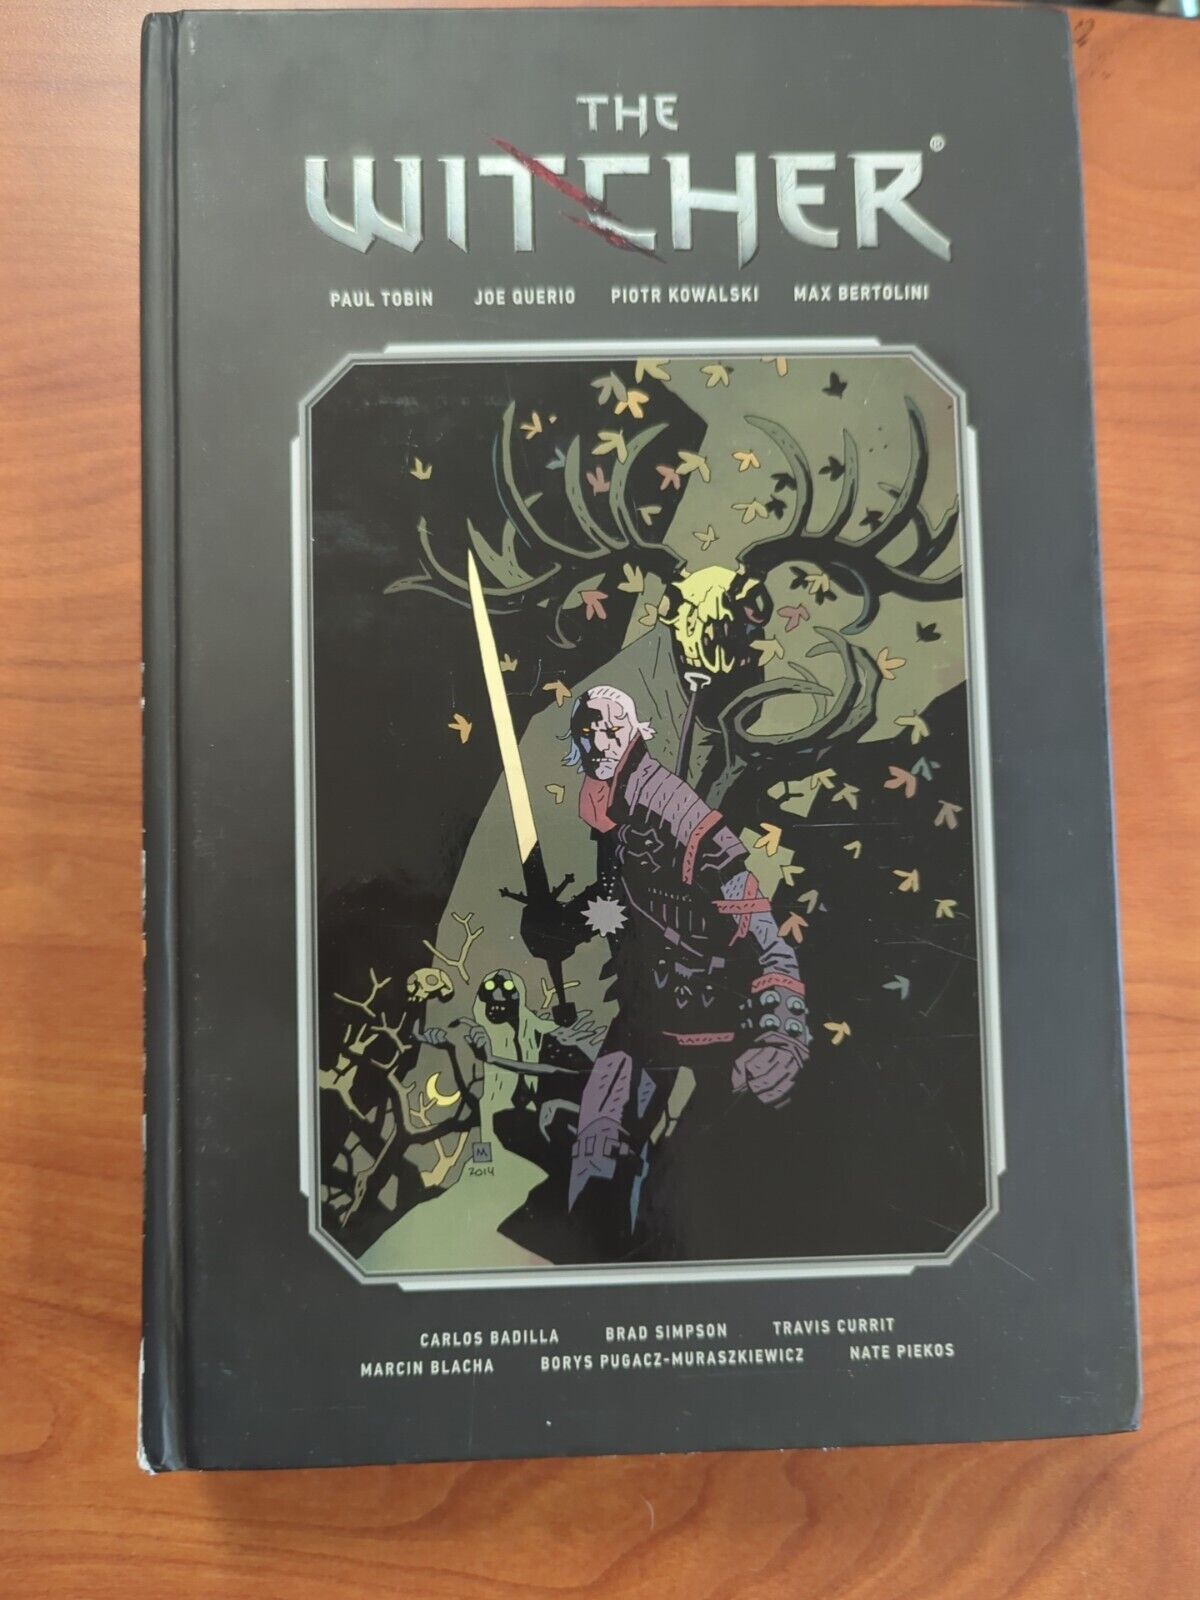 The Witcher: Library Edition #1 (Dark Horse Comics)